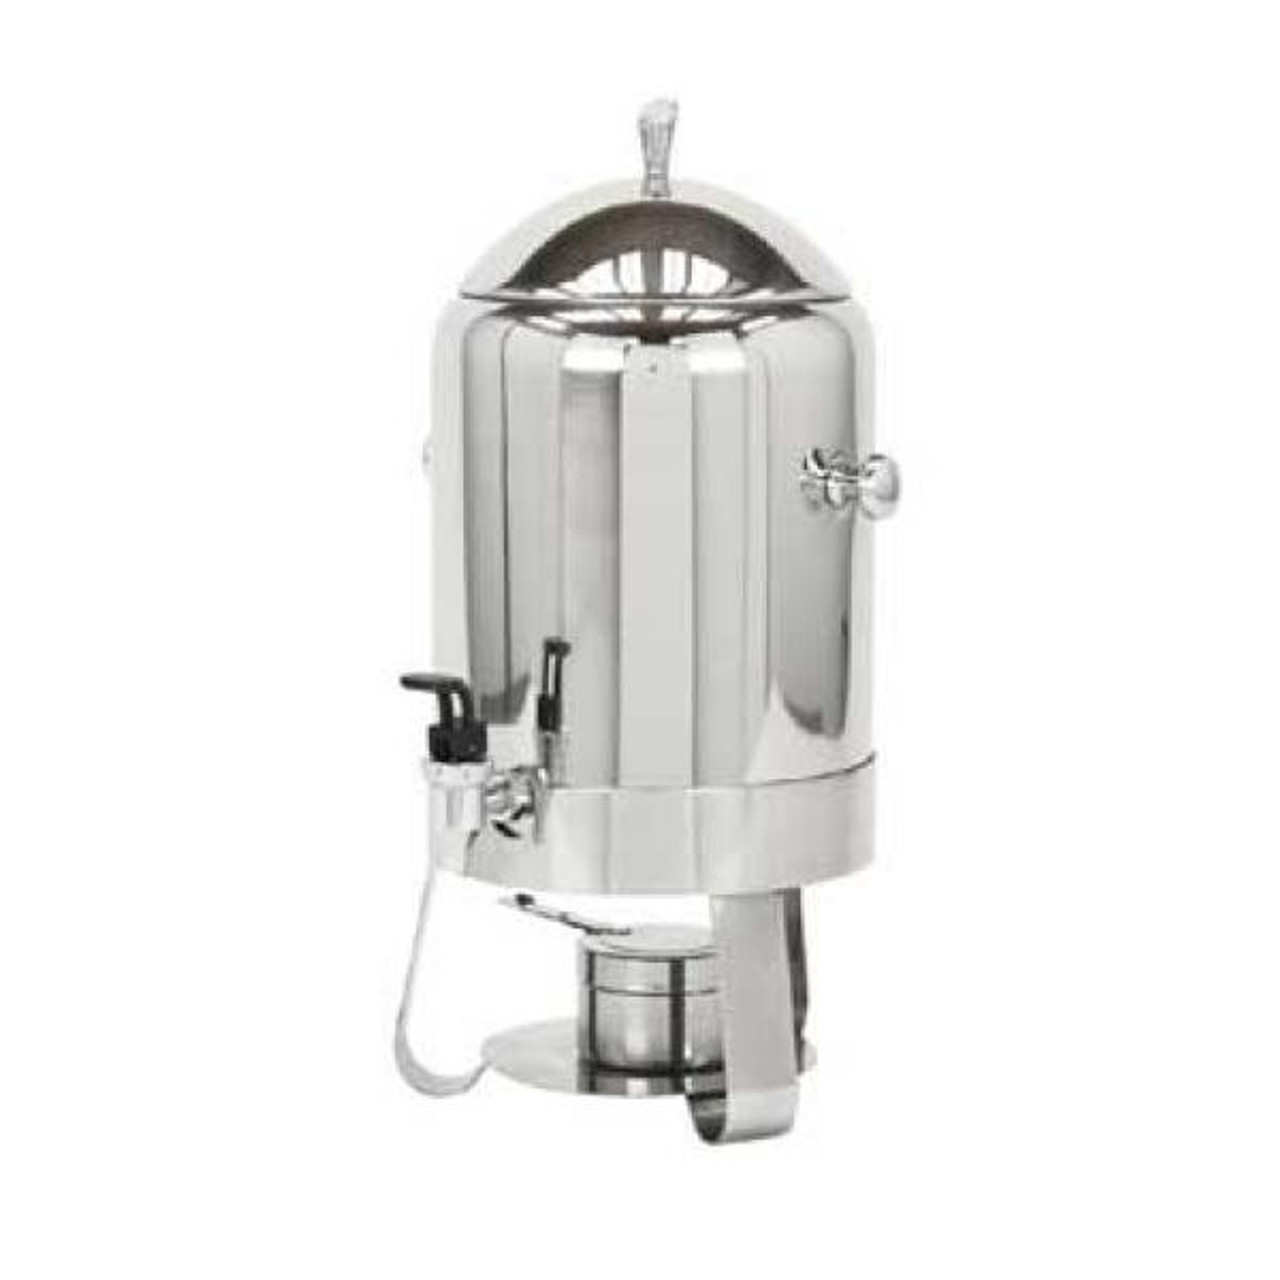 Odin 3 Gallon Coffee Urn: Premium Stainless Steel Brewer with Insulated Lid  - SMART Buffet Ware